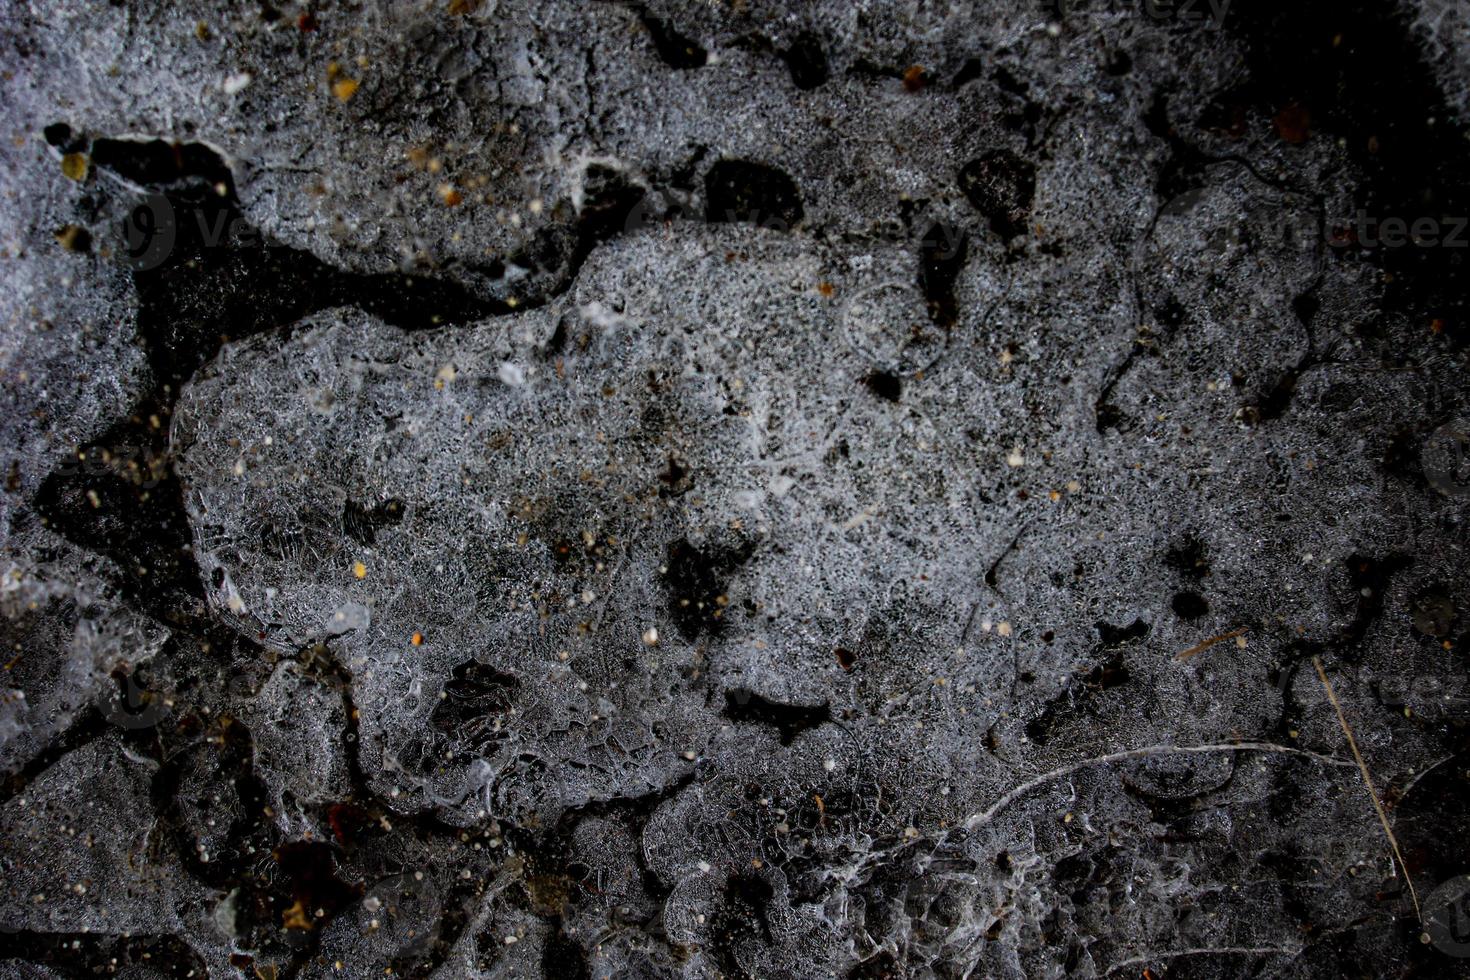 nteresting abstract background with ice close-up on a frozen puddle photo